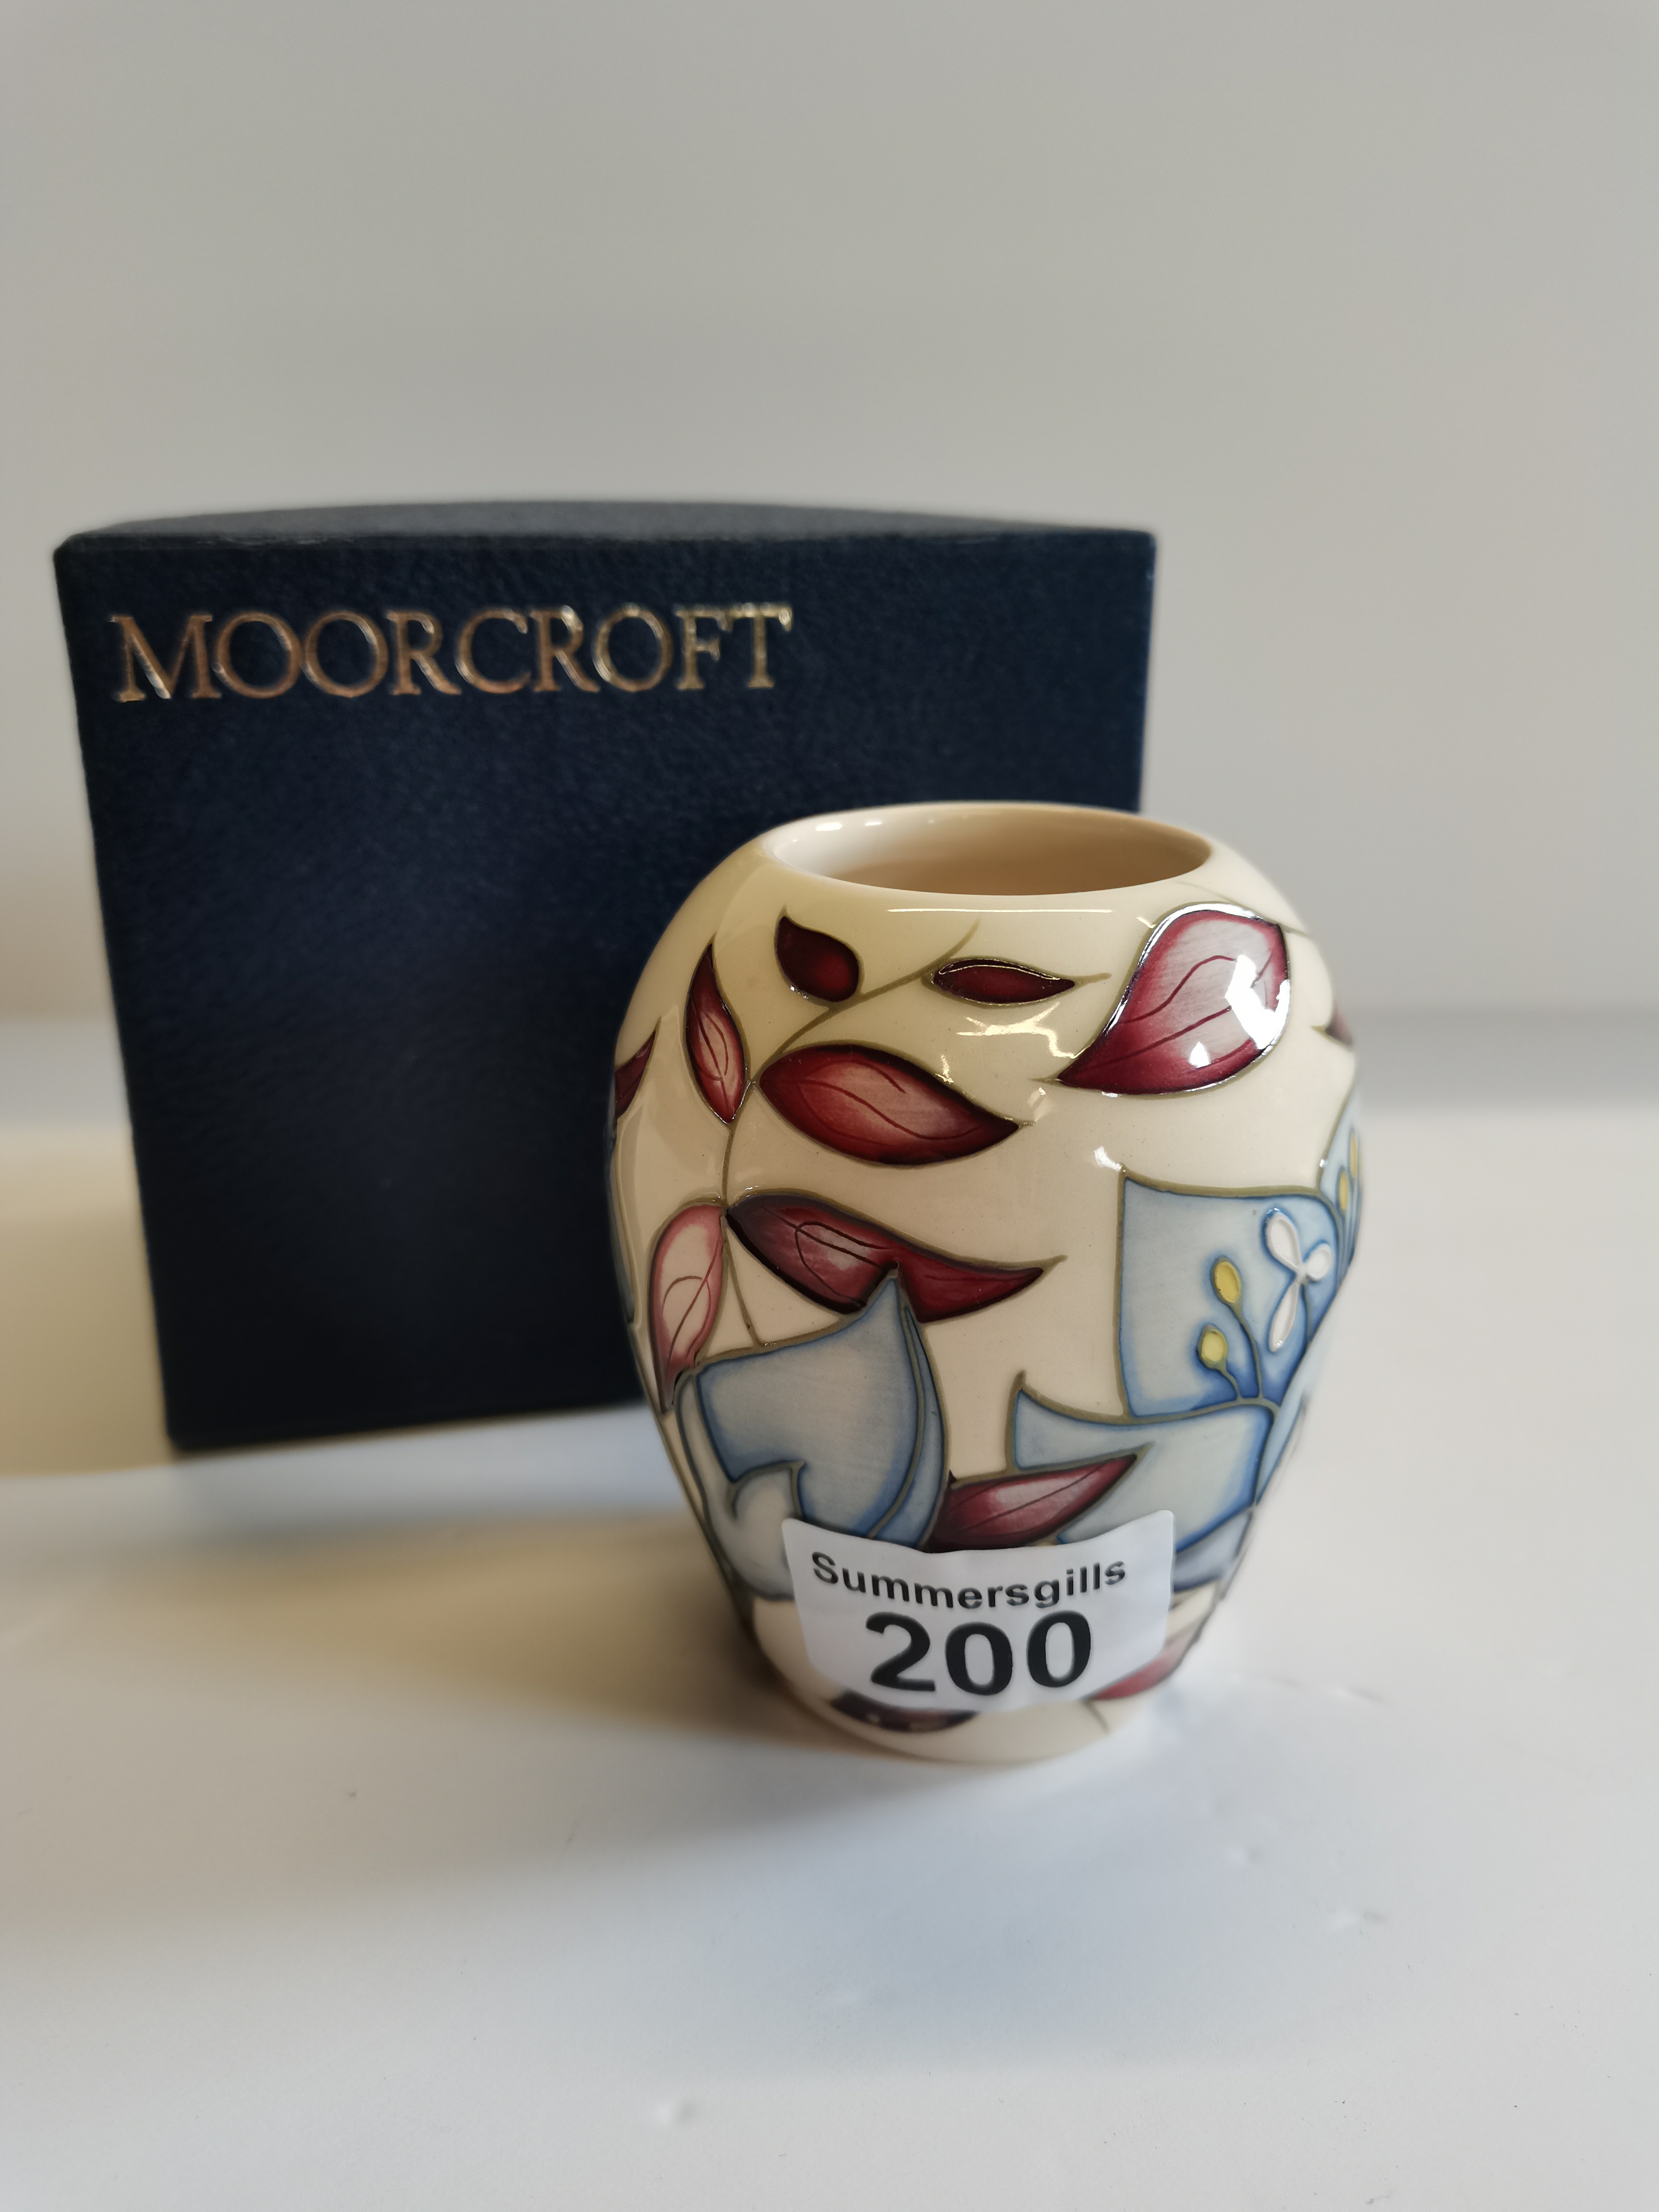 Moorcroft Jacobs Ladder Vase designed by Alicia Amison Hx9.5cm excellent condition with box